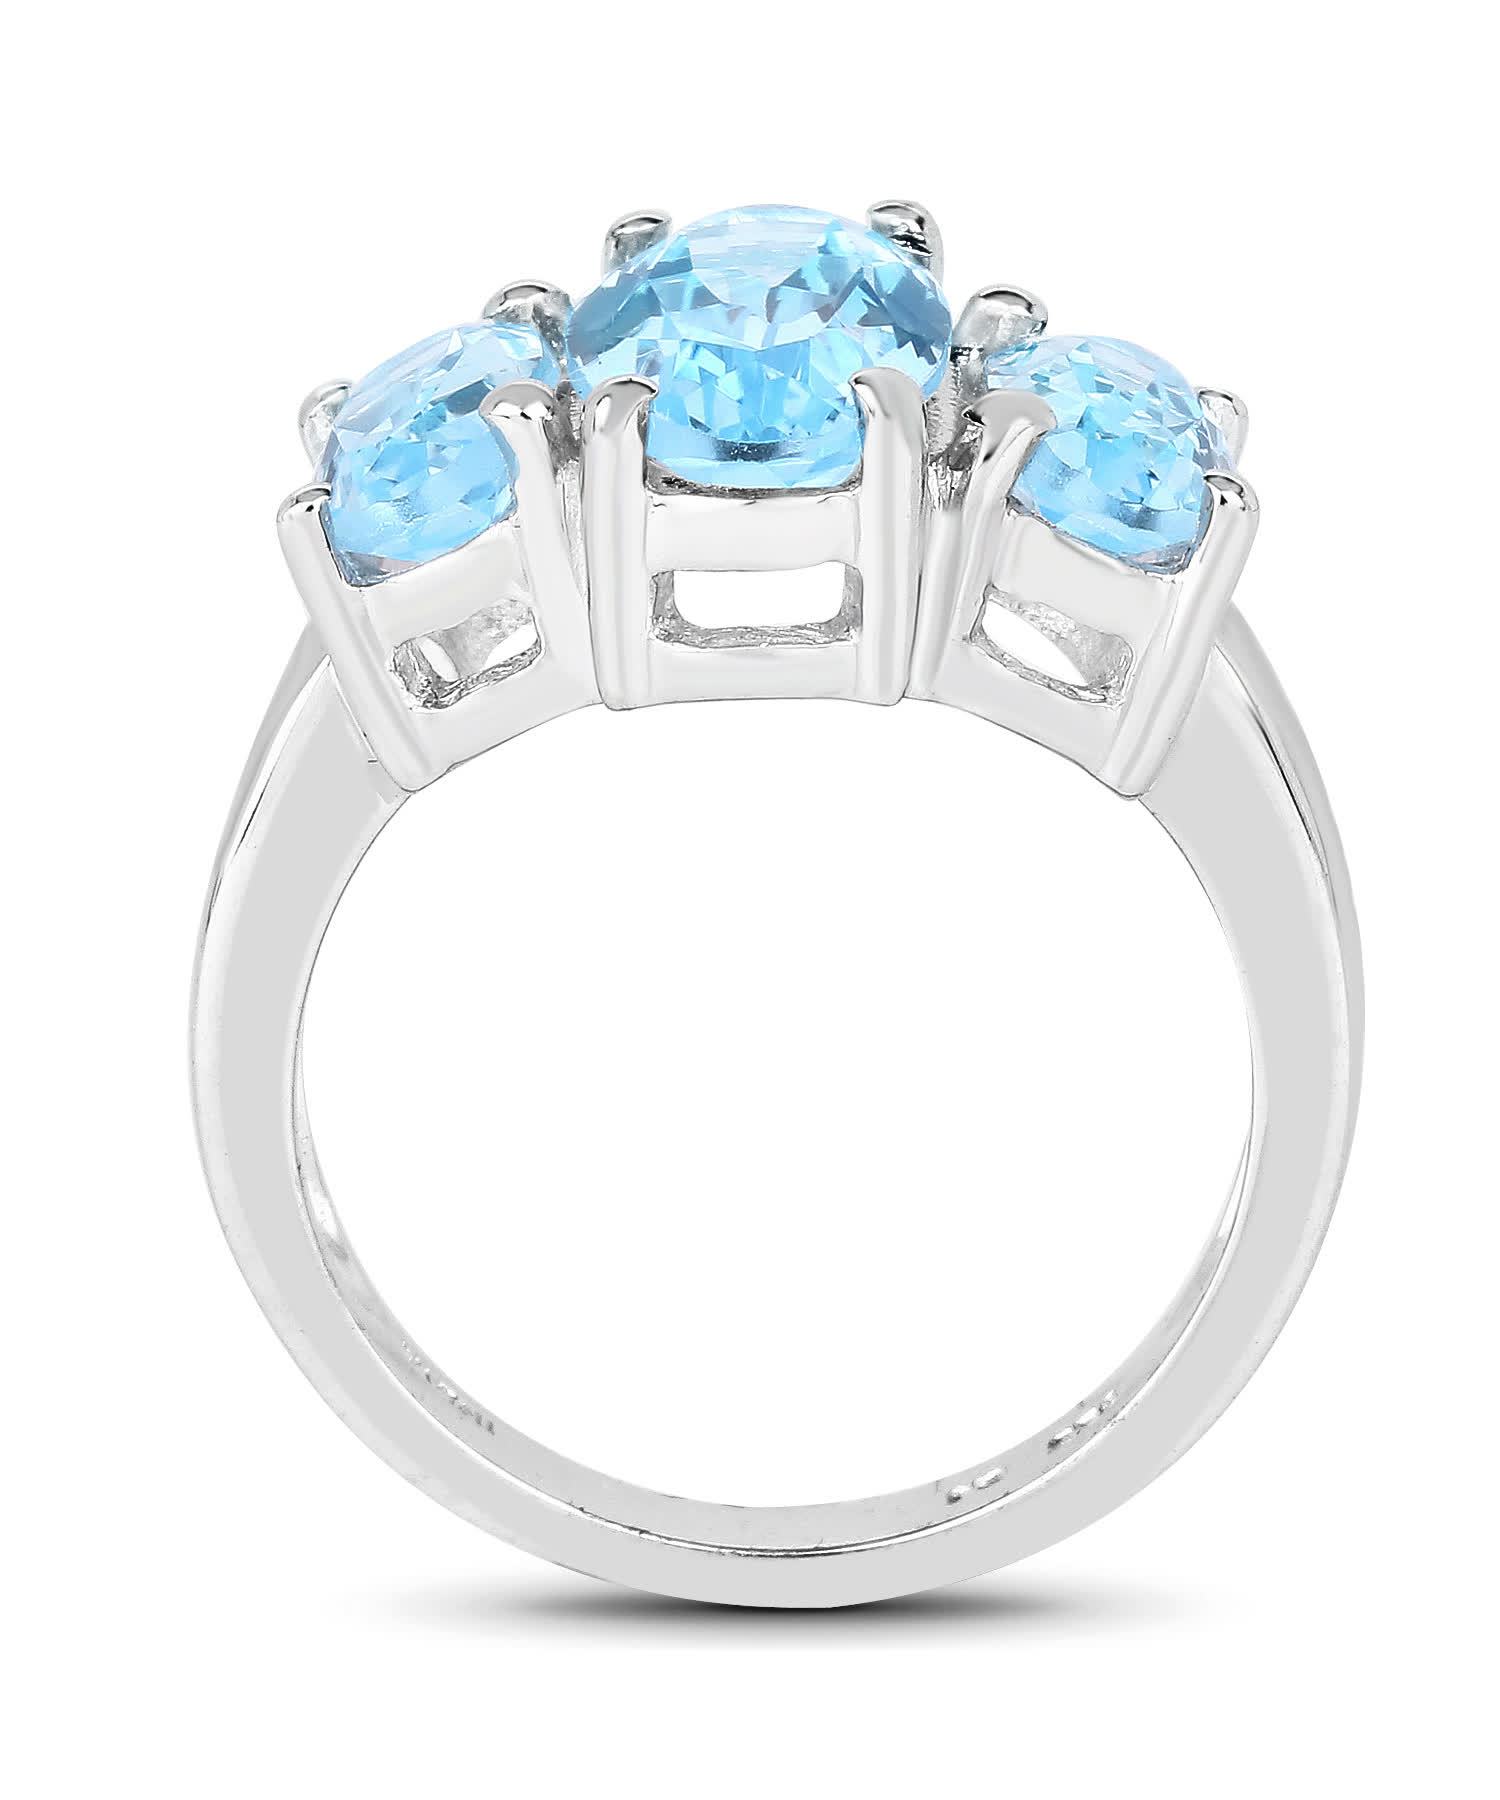 7.77ctw Natural Swiss Blue Topaz Rhodium Plated 925 Sterling Silver Three-Stone Right Hand Ring View 2